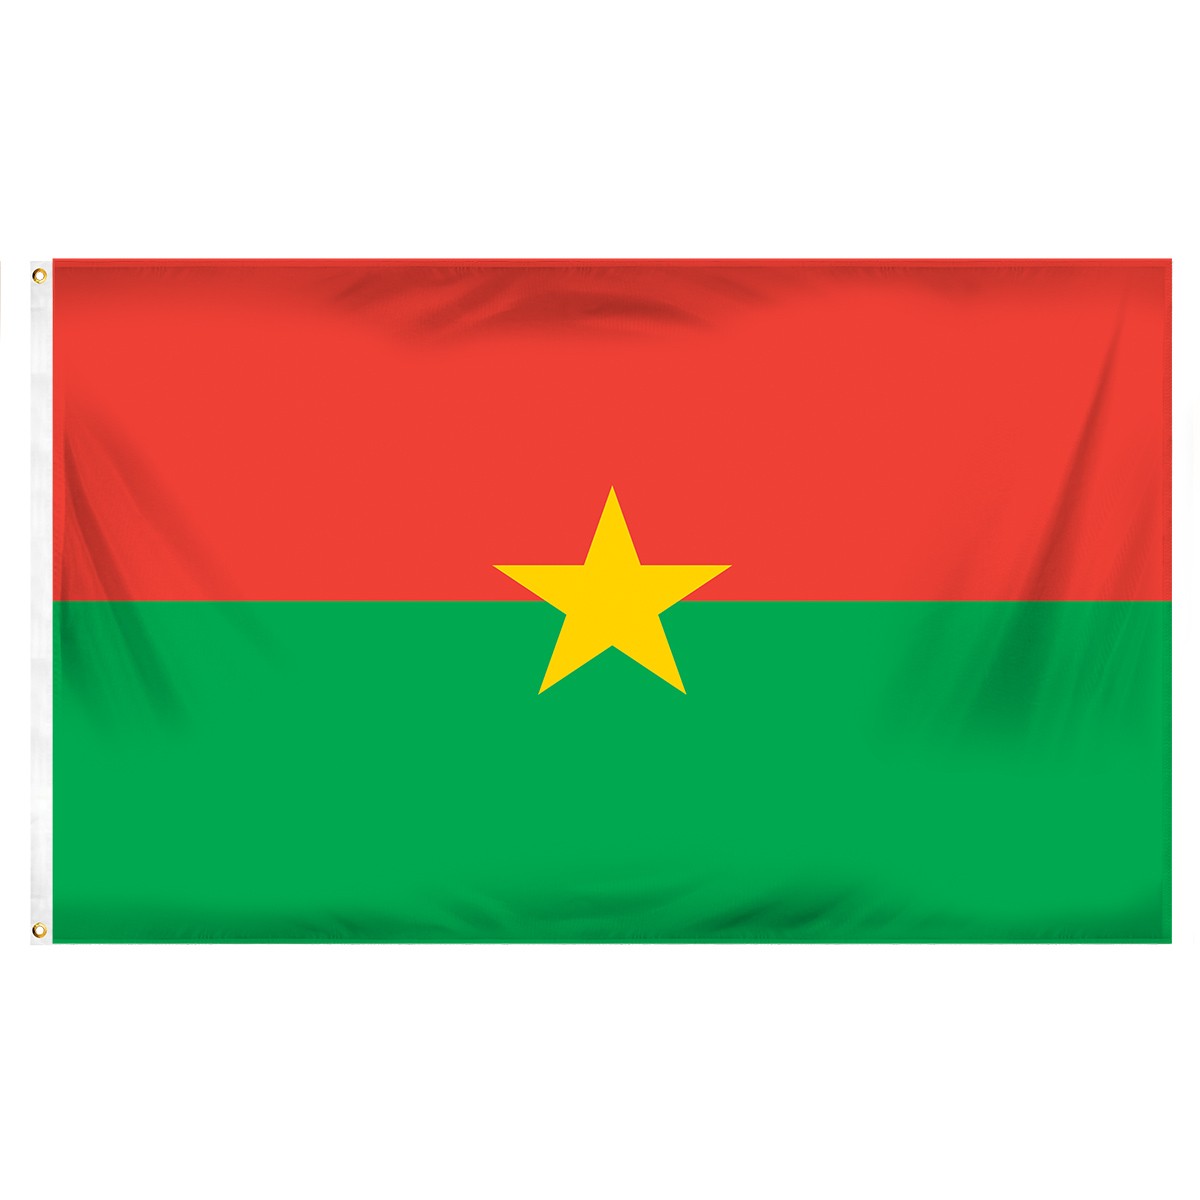 Burkina Faso Submit Flags and Flags